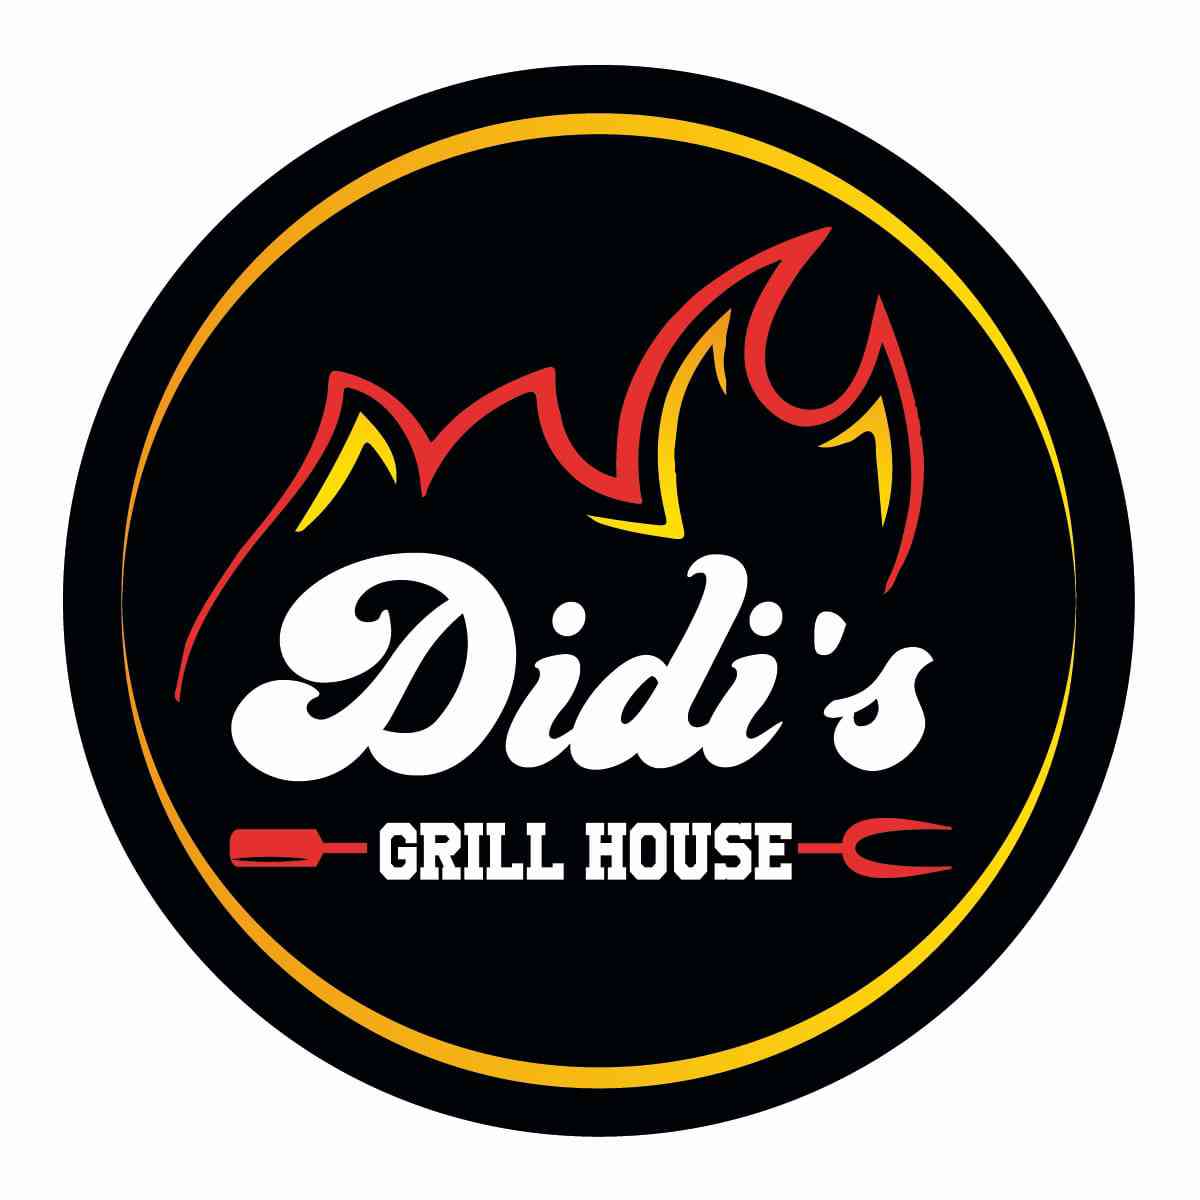 Didi's Grill House